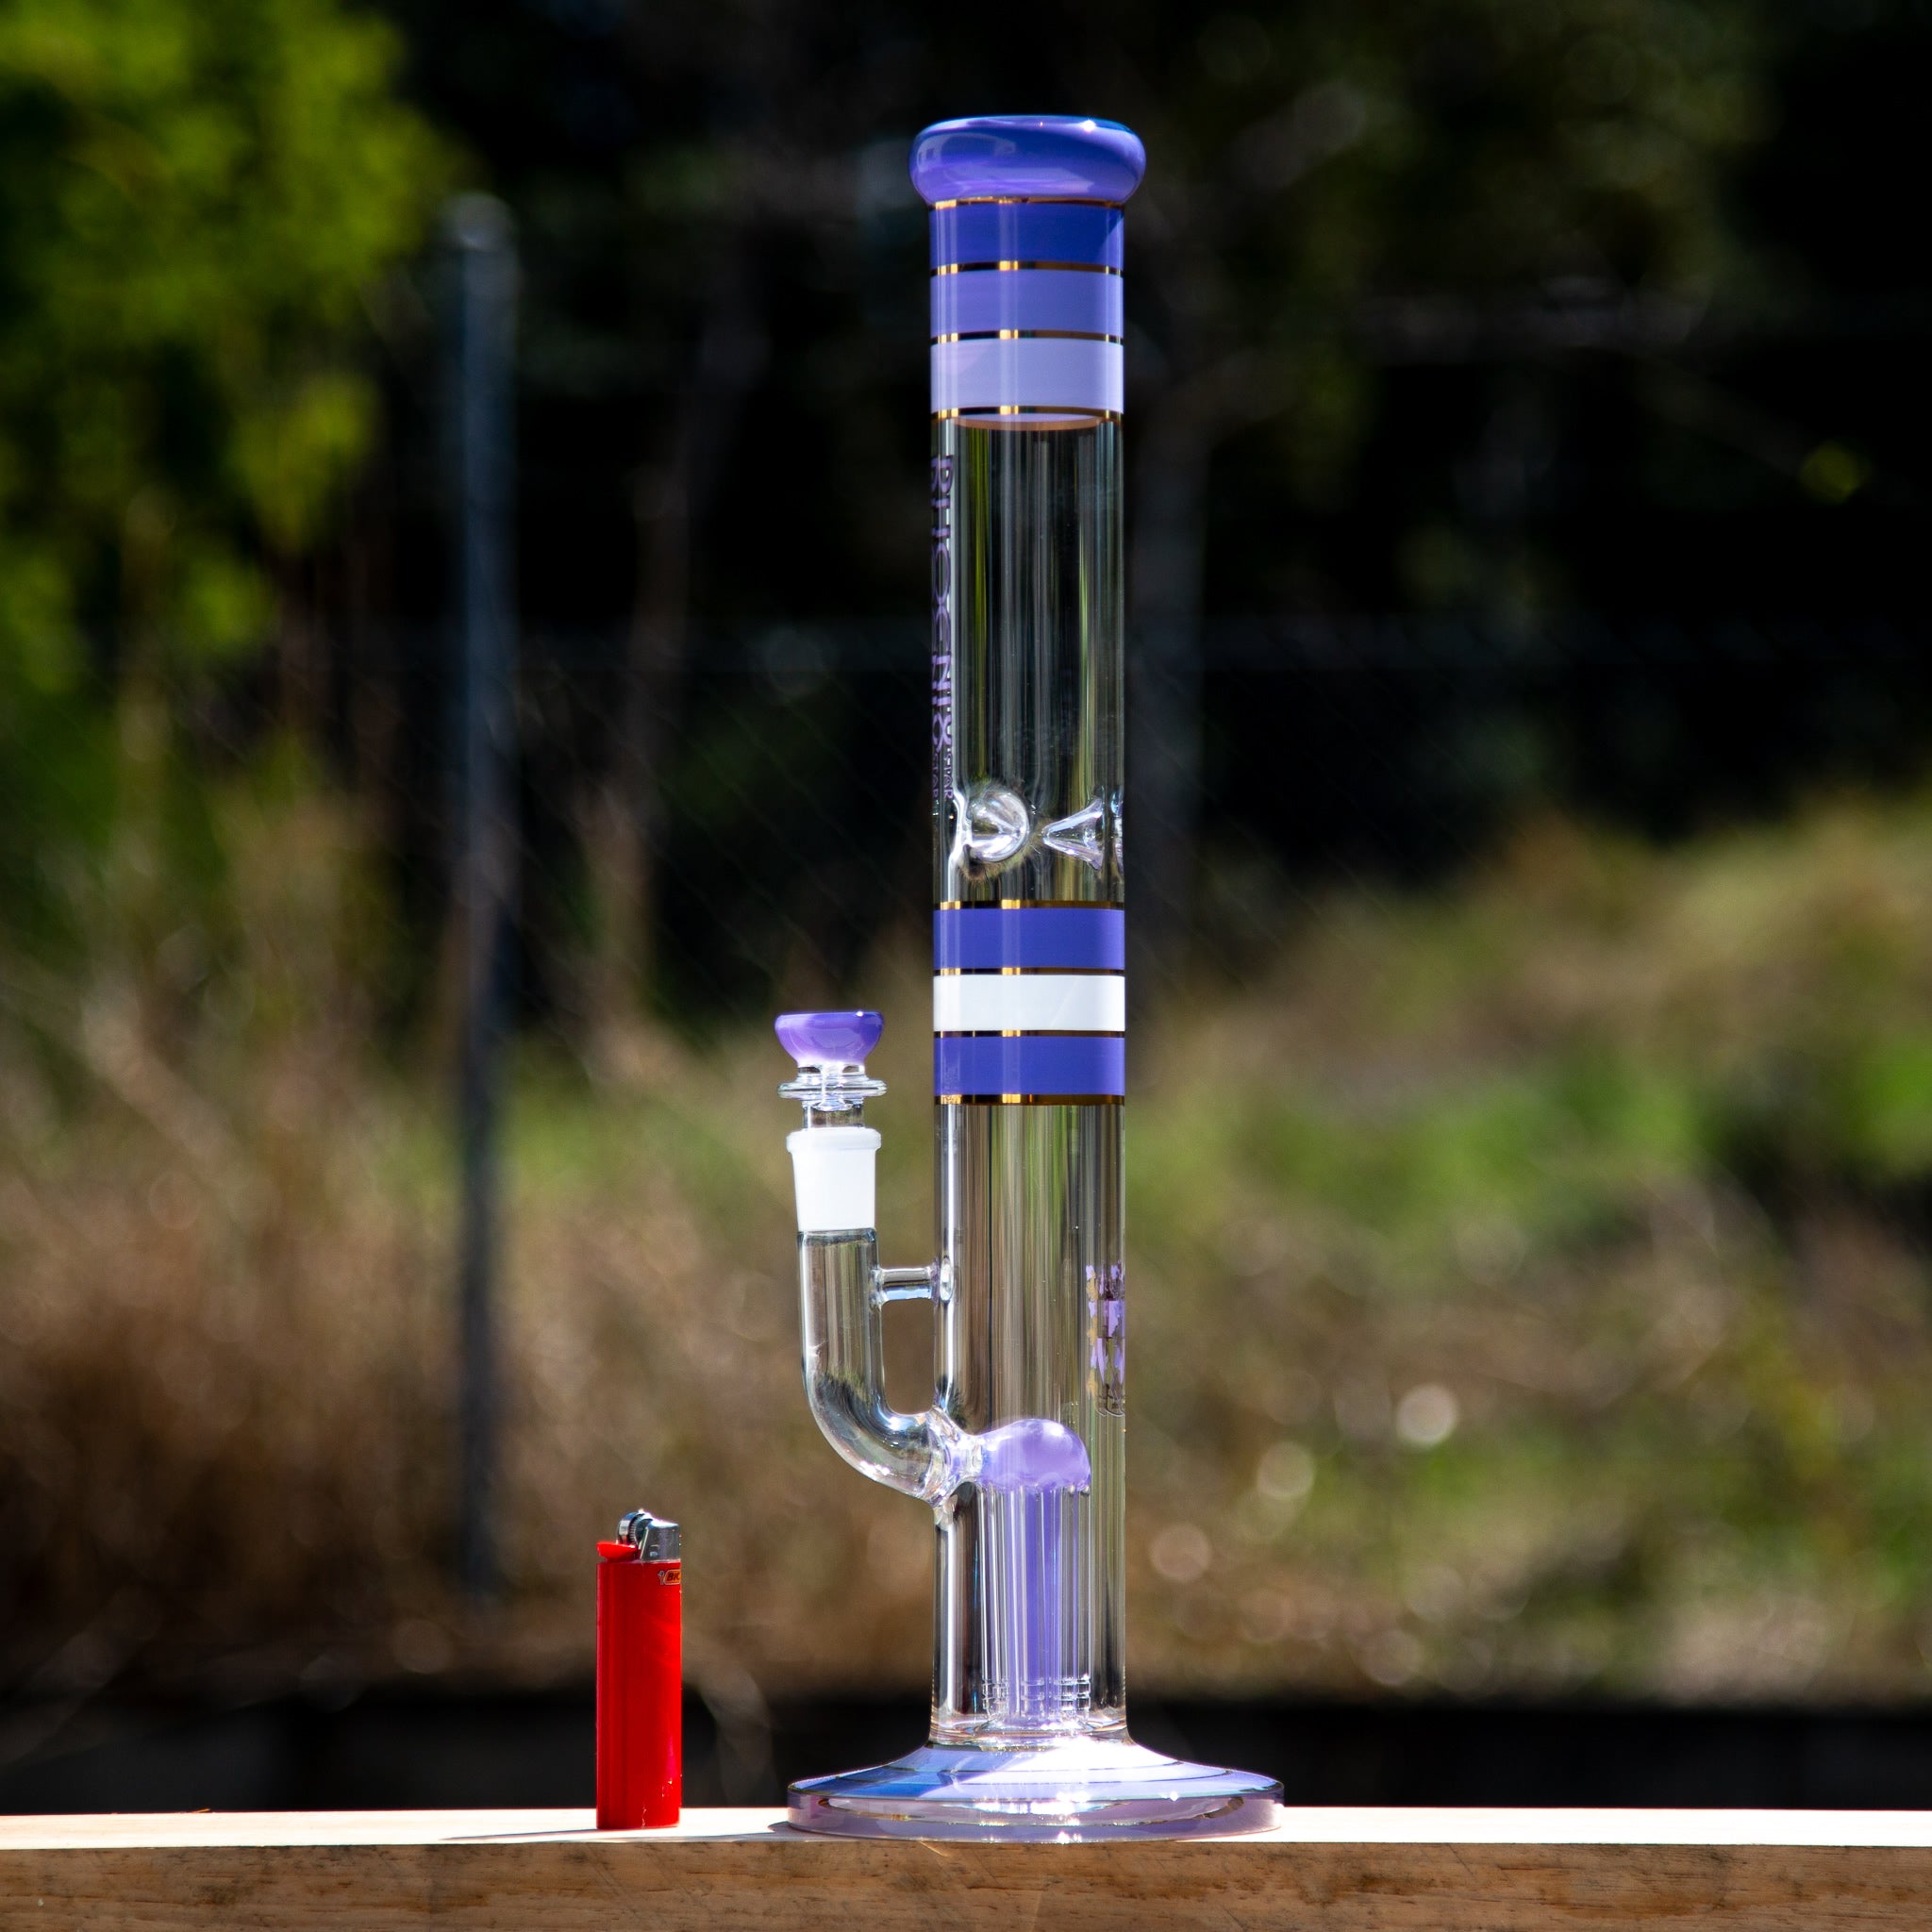 Phoenix tall glass perc bongs featuring 8 arm tree percs pictured at Easy Bong Australia.